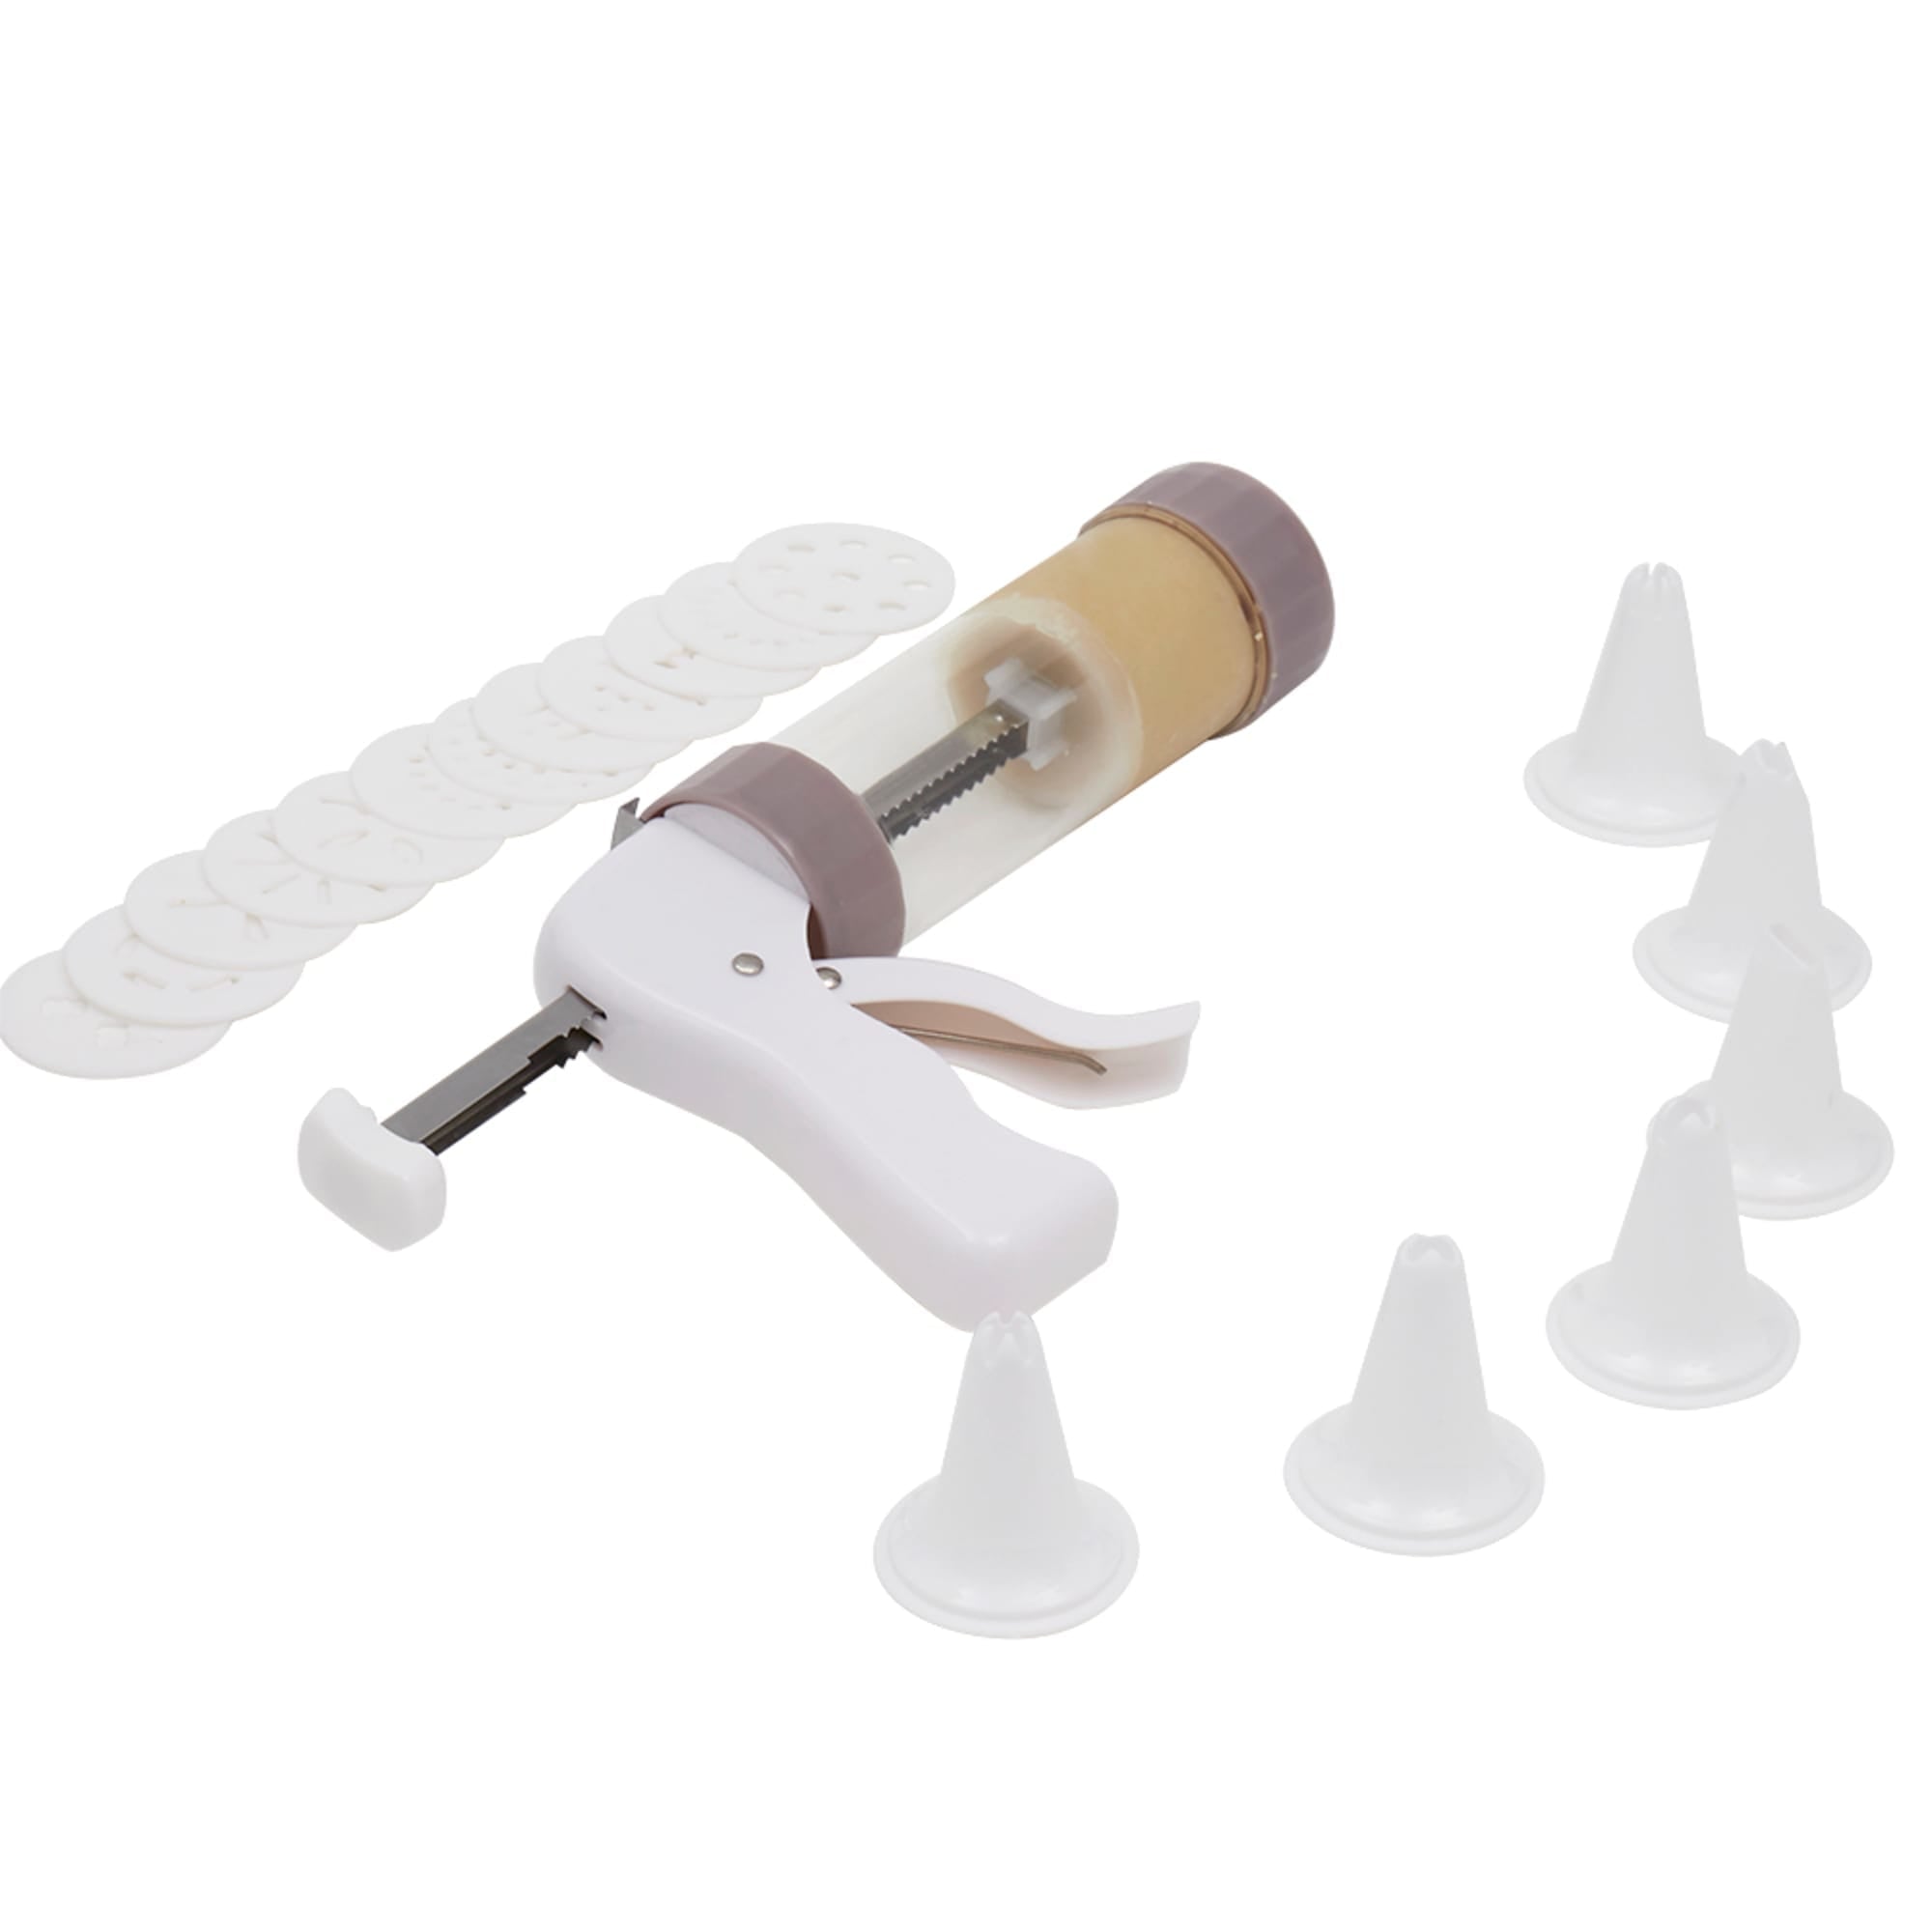 Home Basics Cookie Press with Cookie Discs and Decorating Tips $6 EACH, CASE PACK OF 8